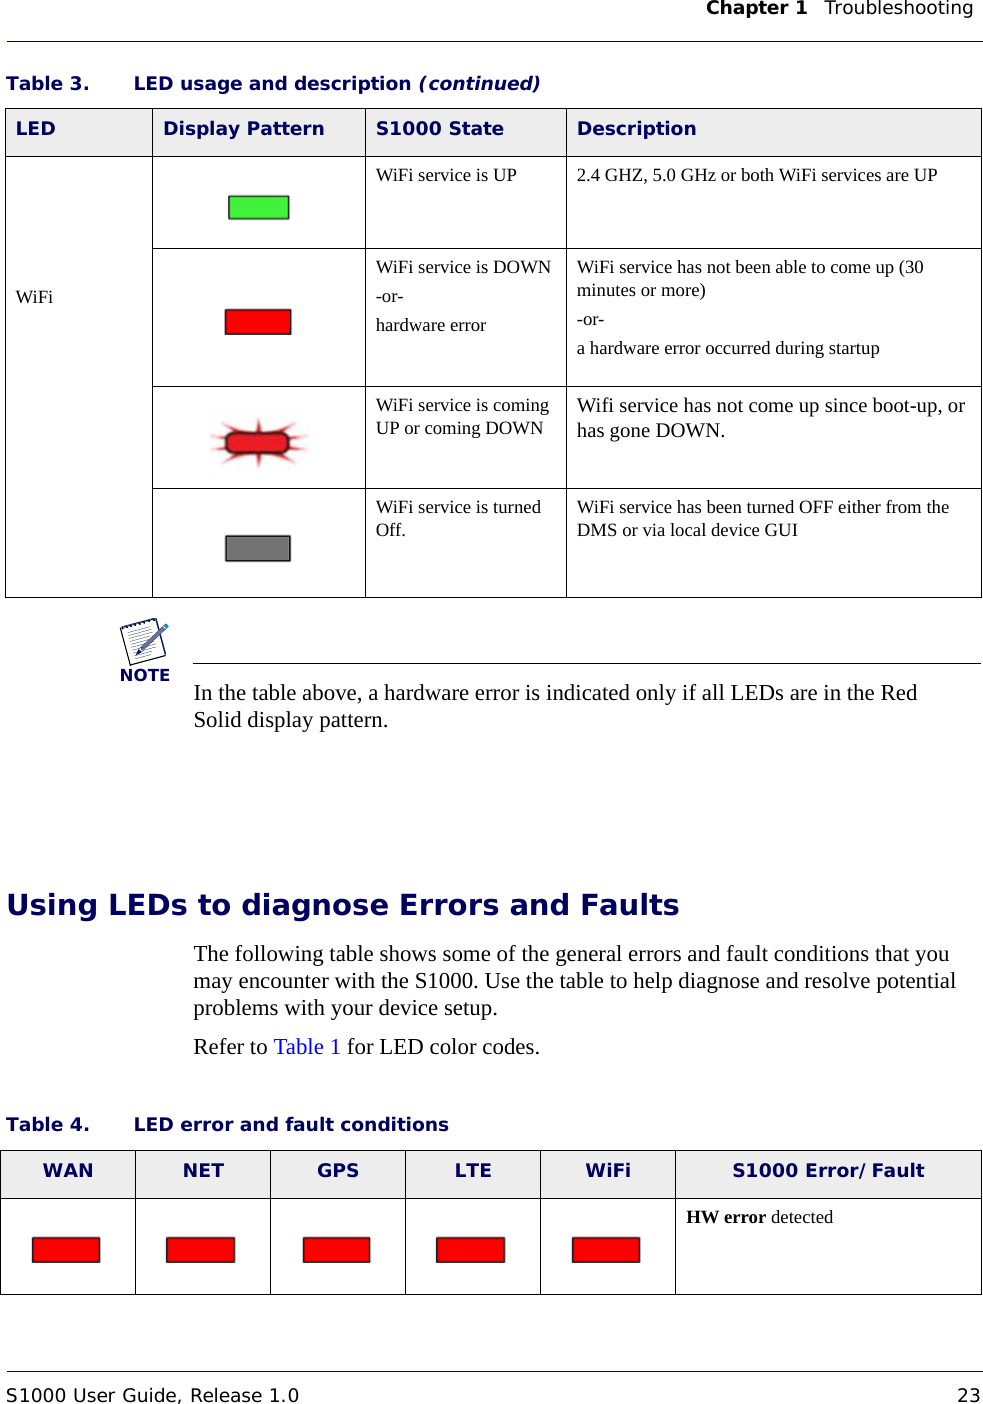 Chapter 1    Troubleshooting S1000 User Guide, Release 1.0 23DRAFTNOTEIn the table above, a hardware error is indicated only if all LEDs are in the Red Solid display pattern.Using LEDs to diagnose Errors and FaultsThe following table shows some of the general errors and fault conditions that you may encounter with the S1000. Use the table to help diagnose and resolve potential problems with your device setup.Refer to Table 1 for LED color codes.WiFiWiFi service is UP 2.4 GHZ, 5.0 GHz or both WiFi services are UPWiFi service is DOWN -or-hardware errorWiFi service has not been able to come up (30 minutes or more)-or-a hardware error occurred during startupWiFi service is coming UP or coming DOWN Wifi service has not come up since boot-up, or has gone DOWN.WiFi service is turned Off. WiFi service has been turned OFF either from the DMS or via local device GUITable 3. LED usage and description (continued)LED Display Pattern S1000 State DescriptionTable 4. LED error and fault conditions WAN NET GPS LTE WiFi S1000 Error/FaultHW error detected